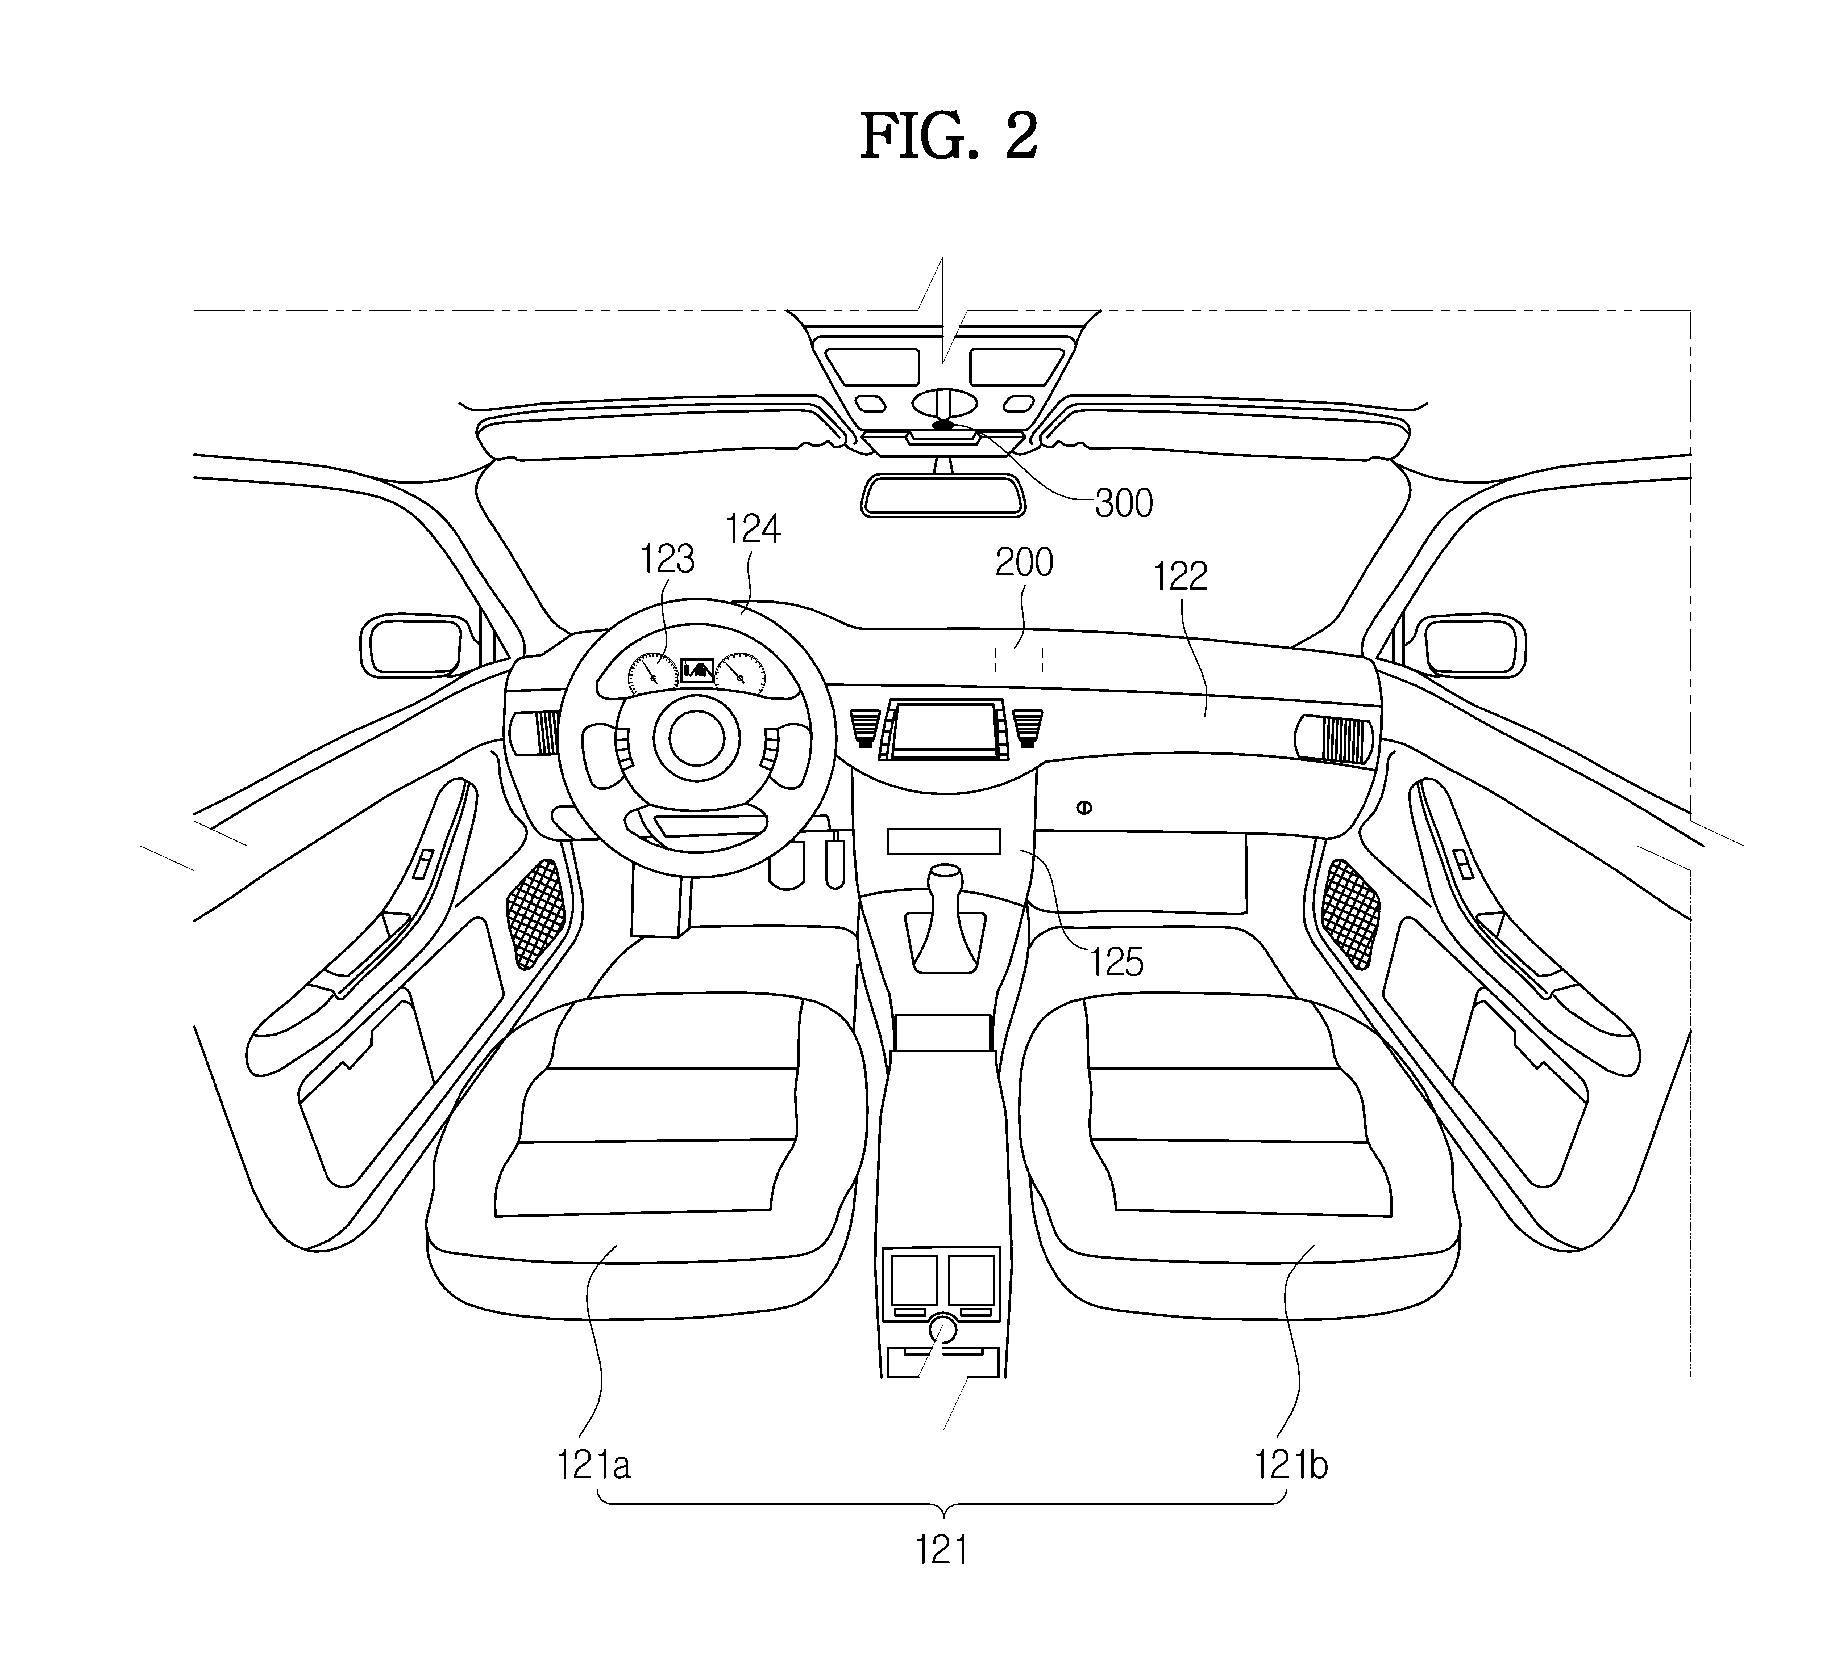 Human machine interface apparatus for vehicle and methods of controlling the same